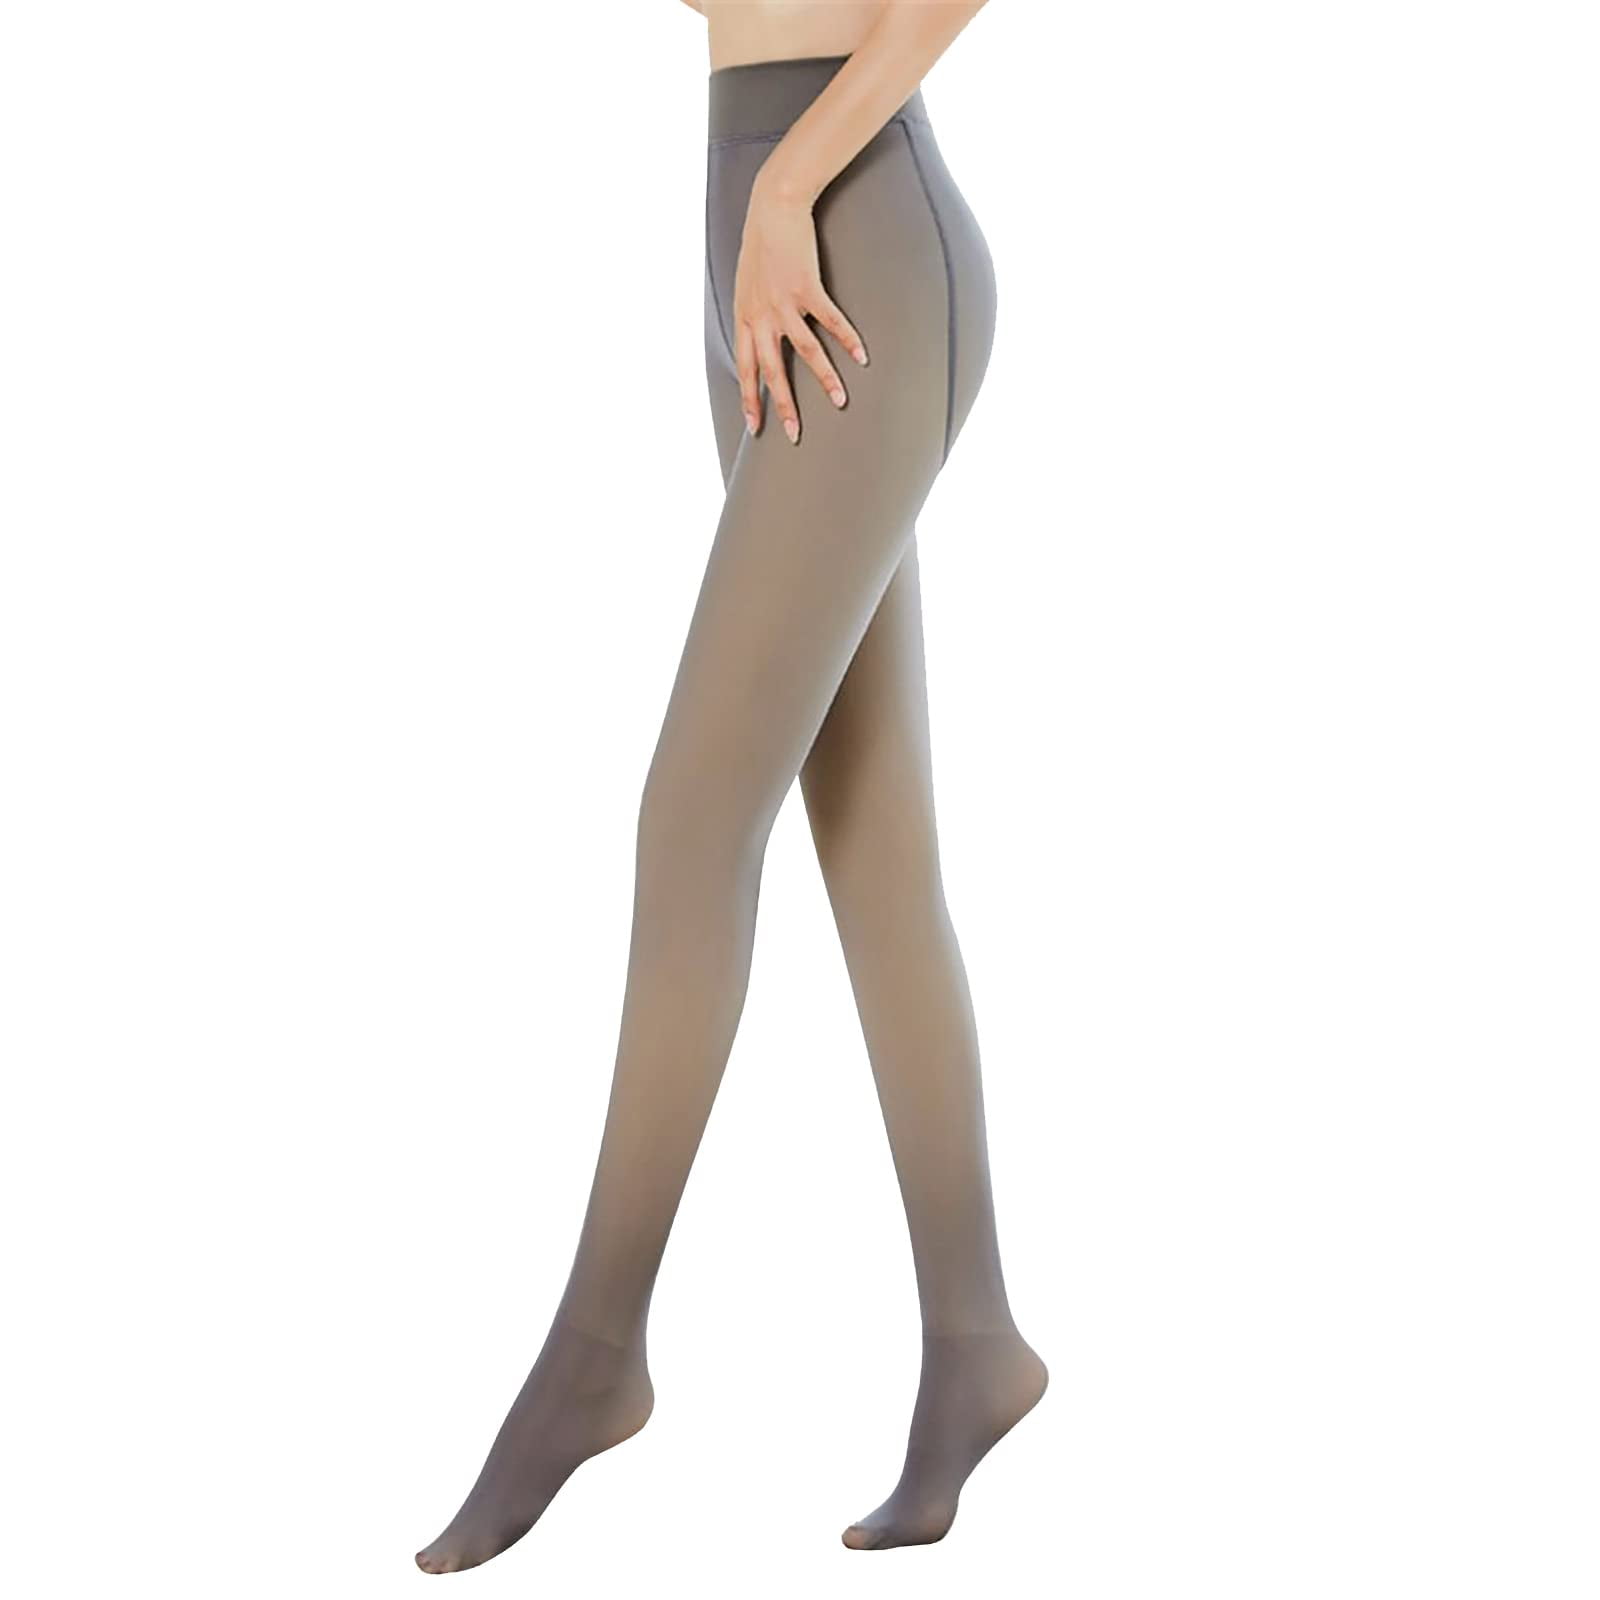 Fleece Lined Tights for Women - Fake Translucent Warm Pantyhose Leggings  Sheer Thick Tights for Winter 